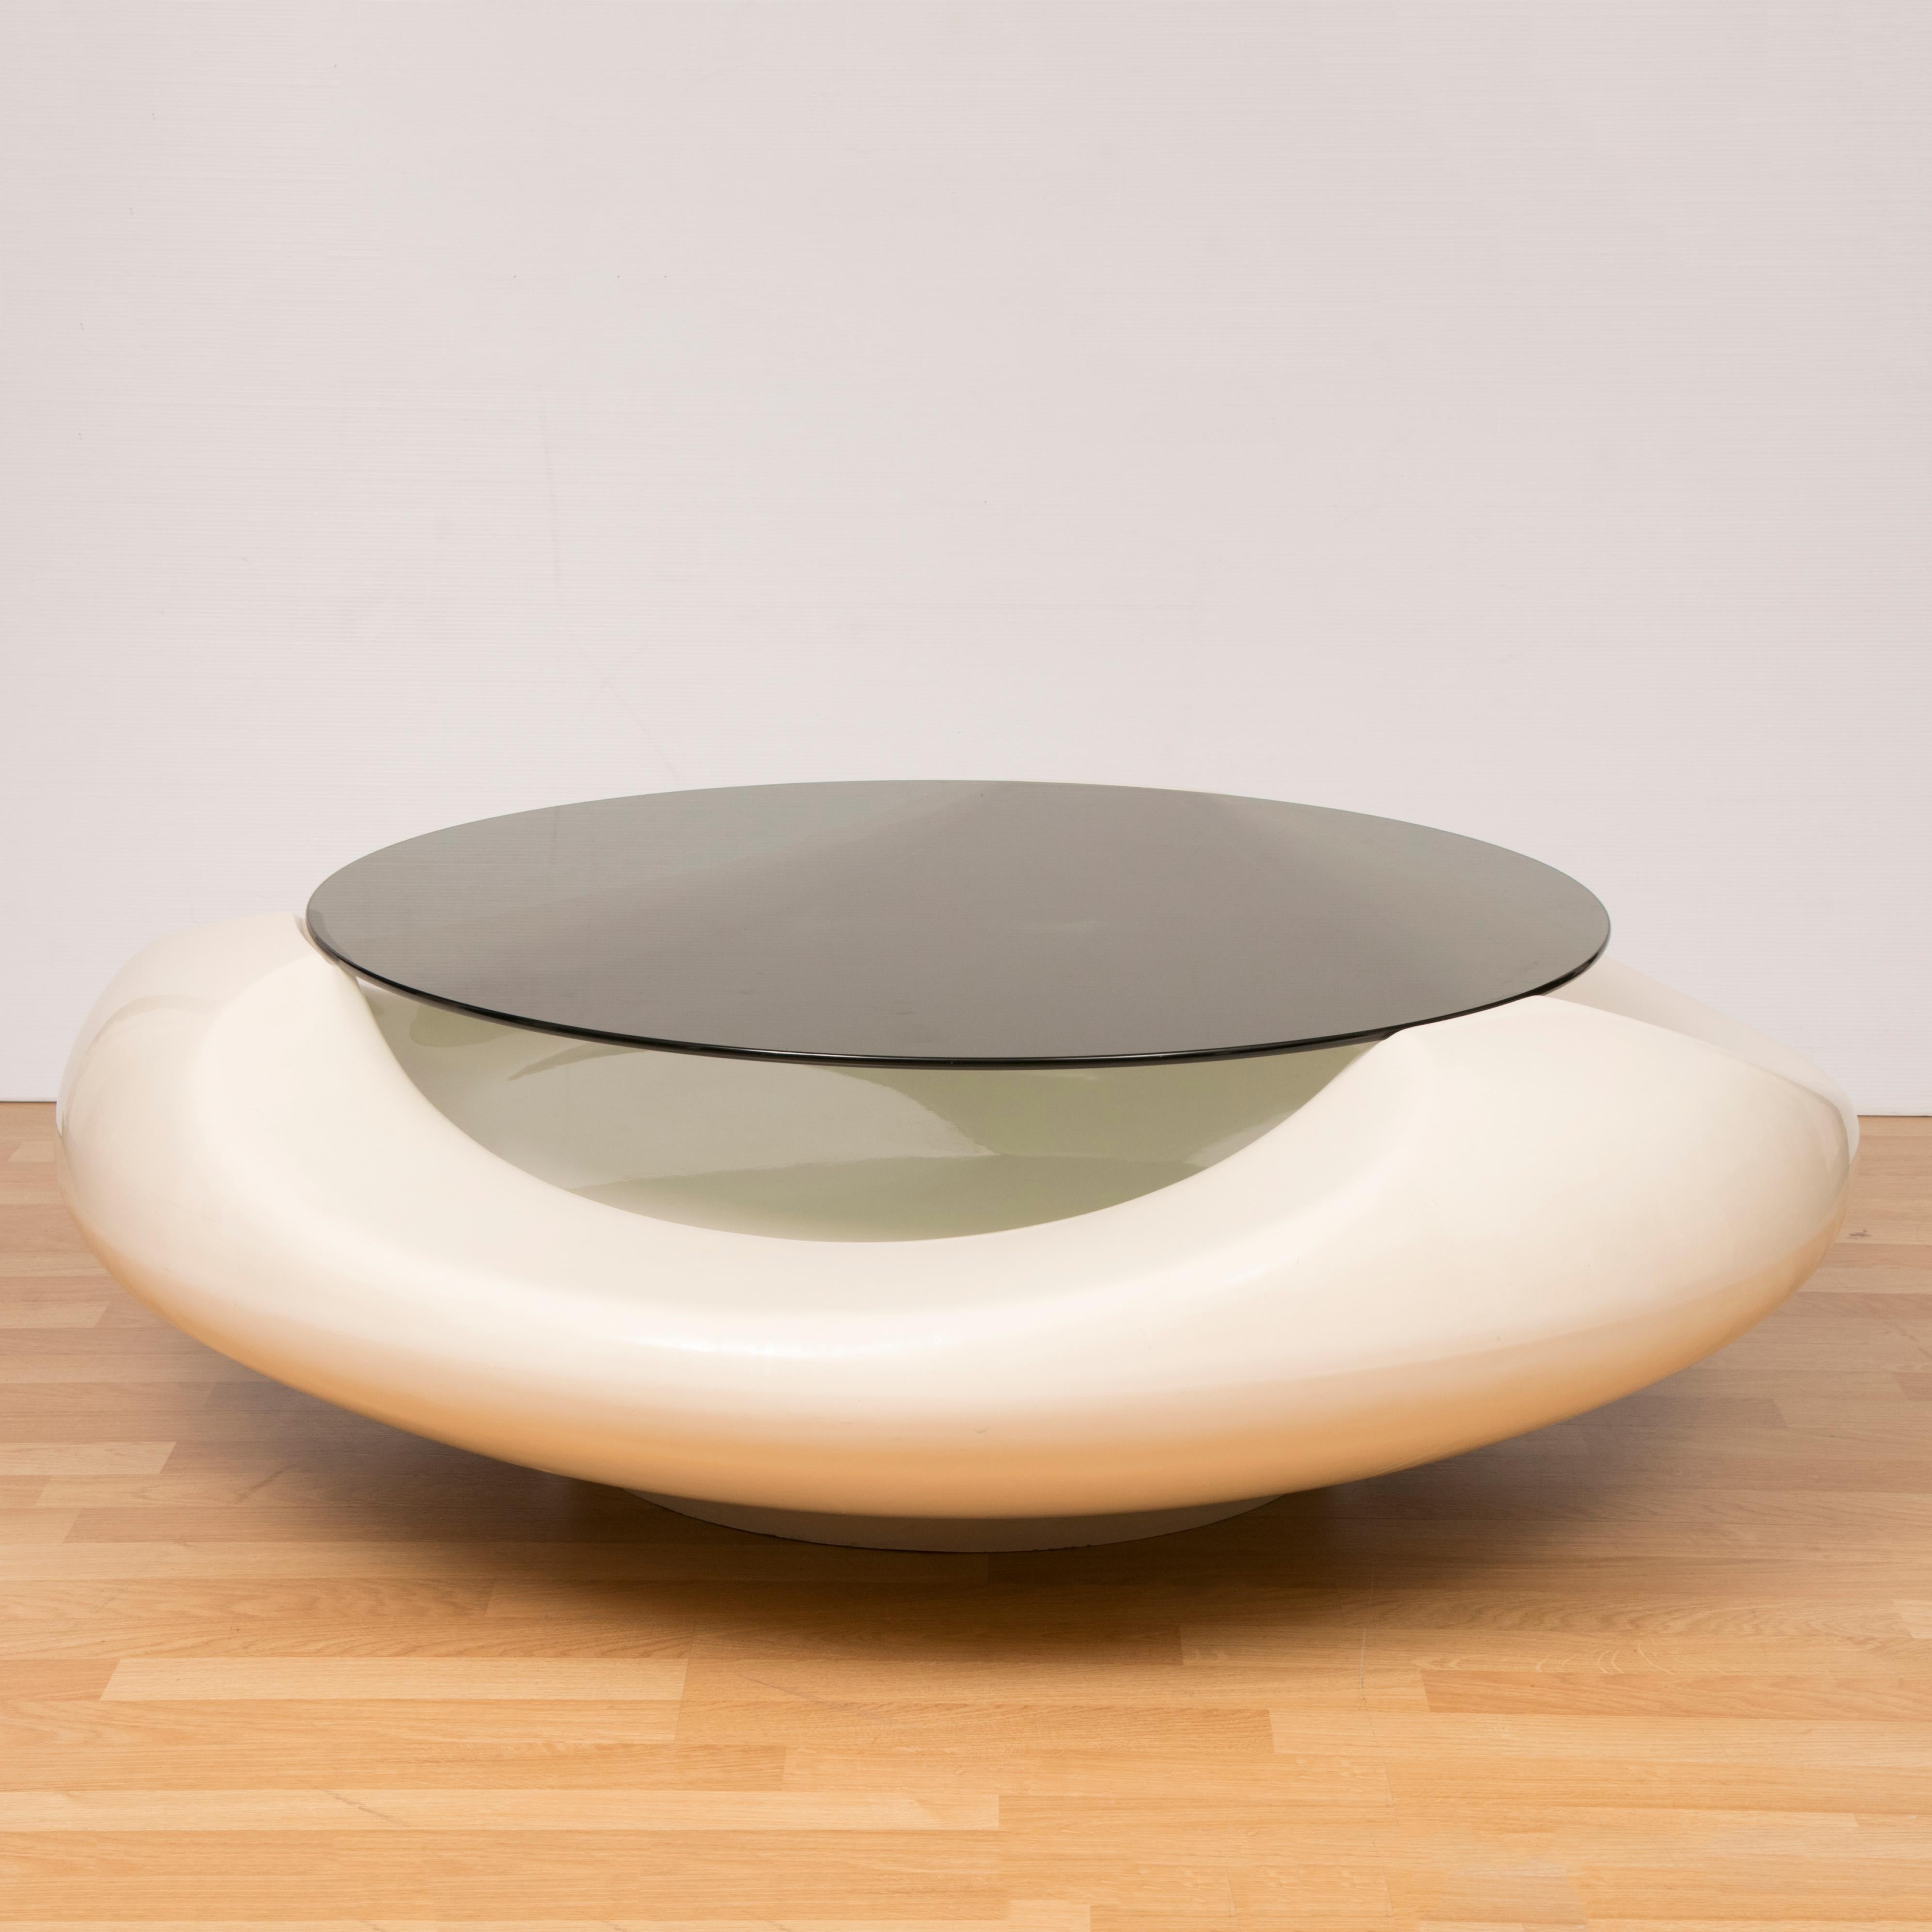 Large Italian 1970s space-age coffee table in the shape of a UFO. Designed and manufactured by Astarte Milano in Italy. This particular table is their larger version. Made of white fibreglass with a round smoked glass tabletop which sits in place on